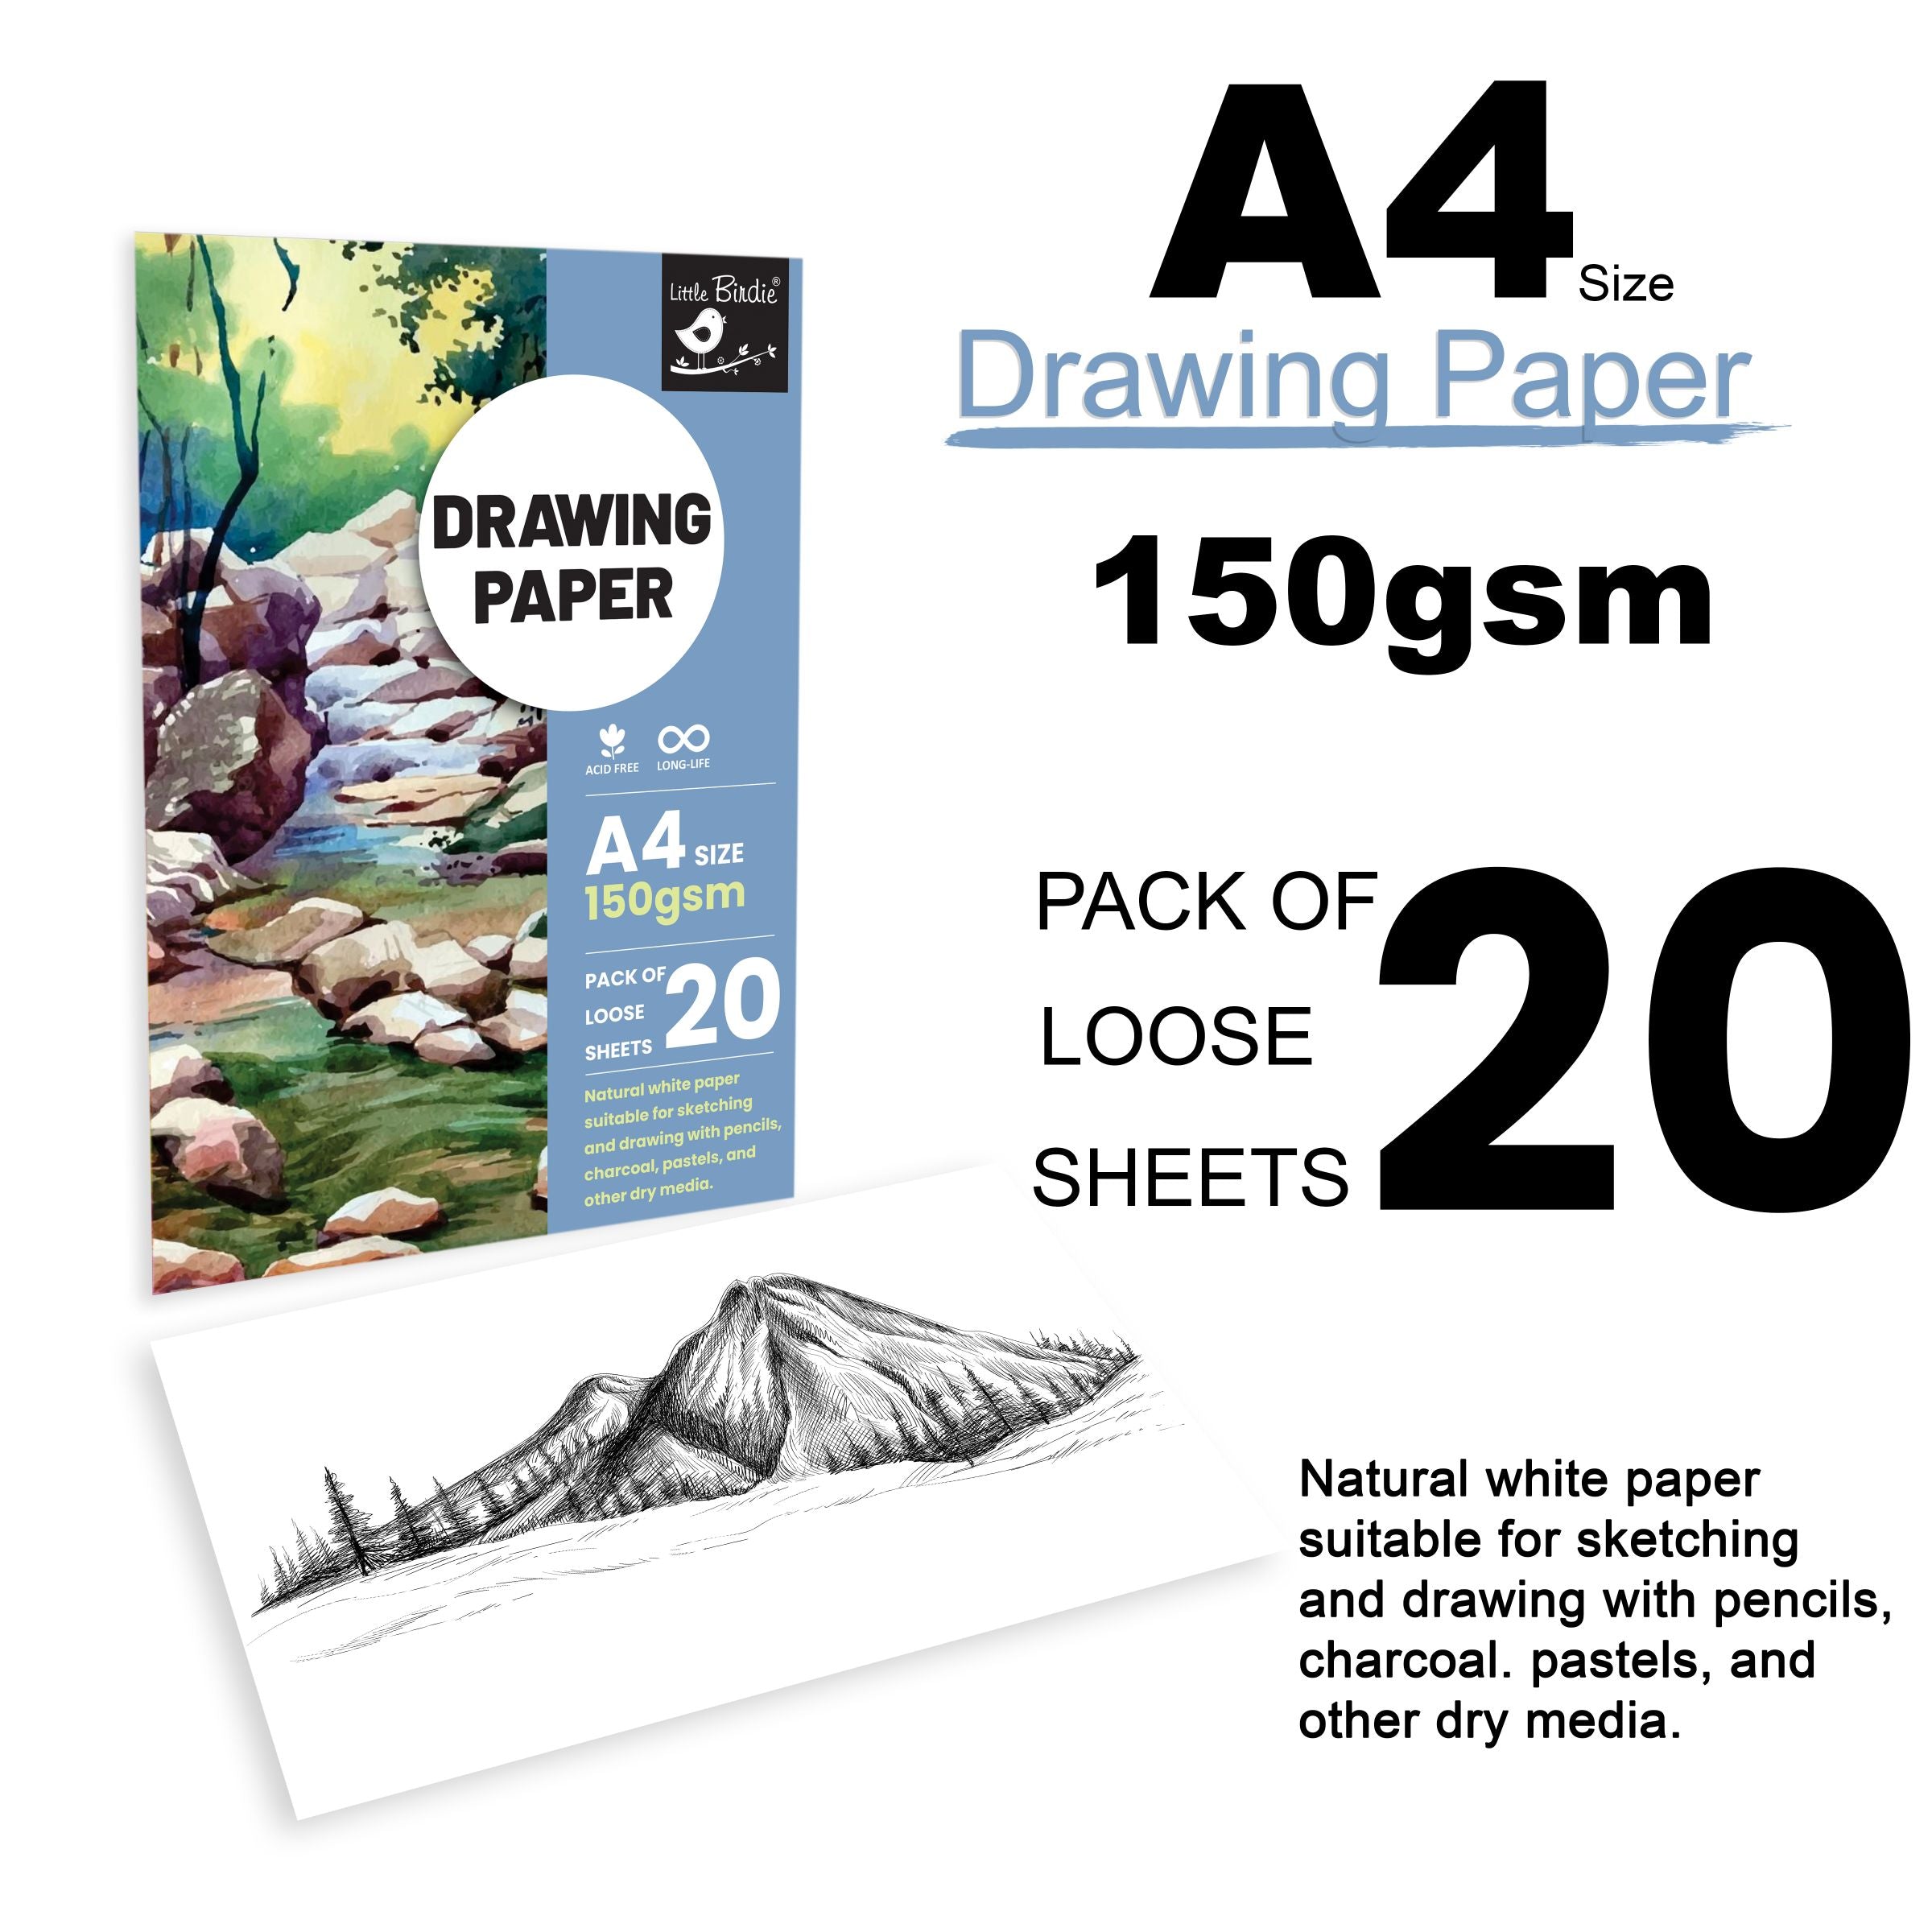 Brustro Drawing Papers 200 GSM A3, Pack of 20 + 4 Free Sheets & Brustro  Ultra Smooth Bristol A3 Size Sheets, 250 GSM (Pack of 10 + 2 Free Sheets) -  Price History